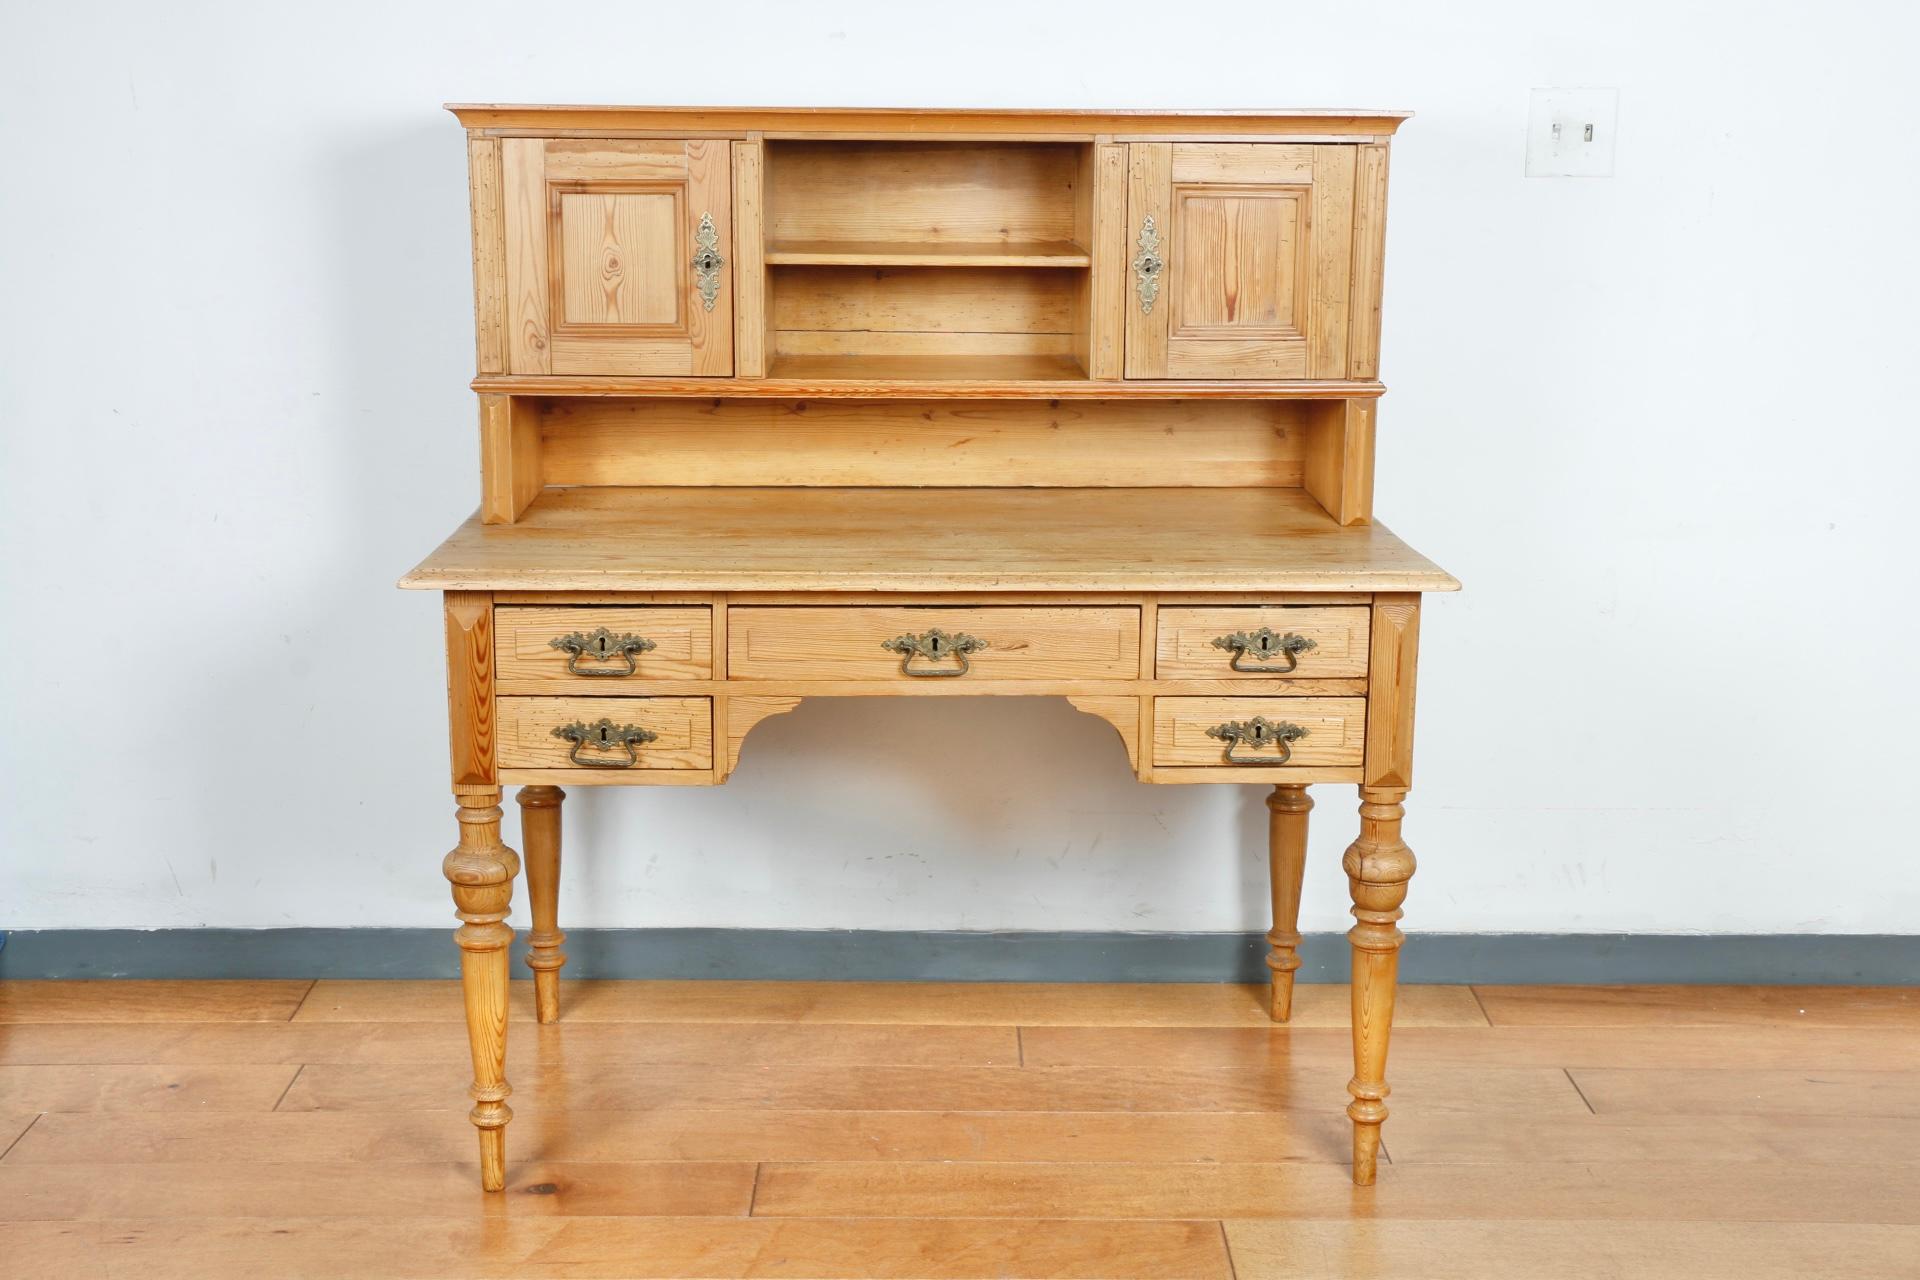 Rustic French 2 piece oak wood secretary desk with metal hardware. Beautifully designed and made. Has dovetail on drawers and connections. Solid sculpted legs. Great for any office and has lots of desk space.